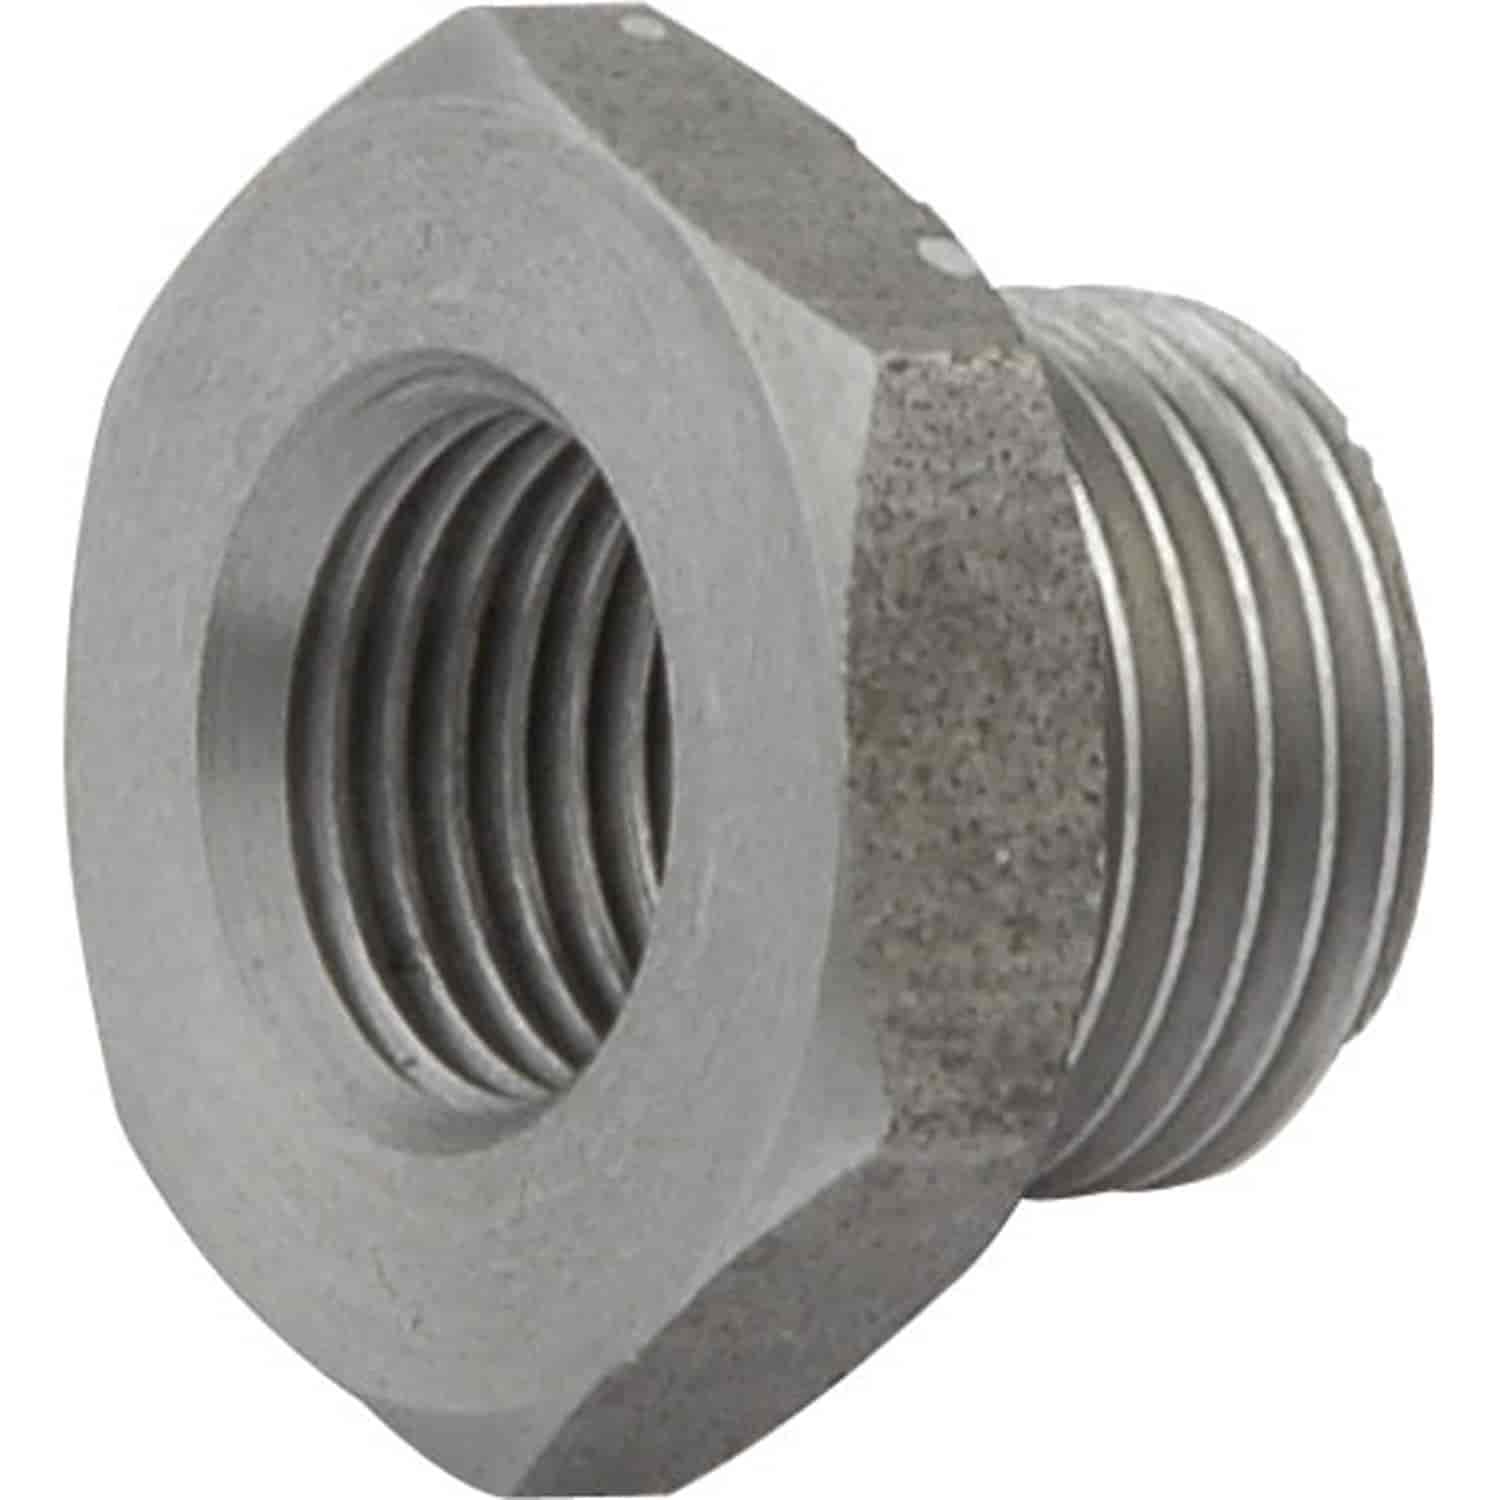 Arbor Adapter 1/2"-20 to 5/8"-18